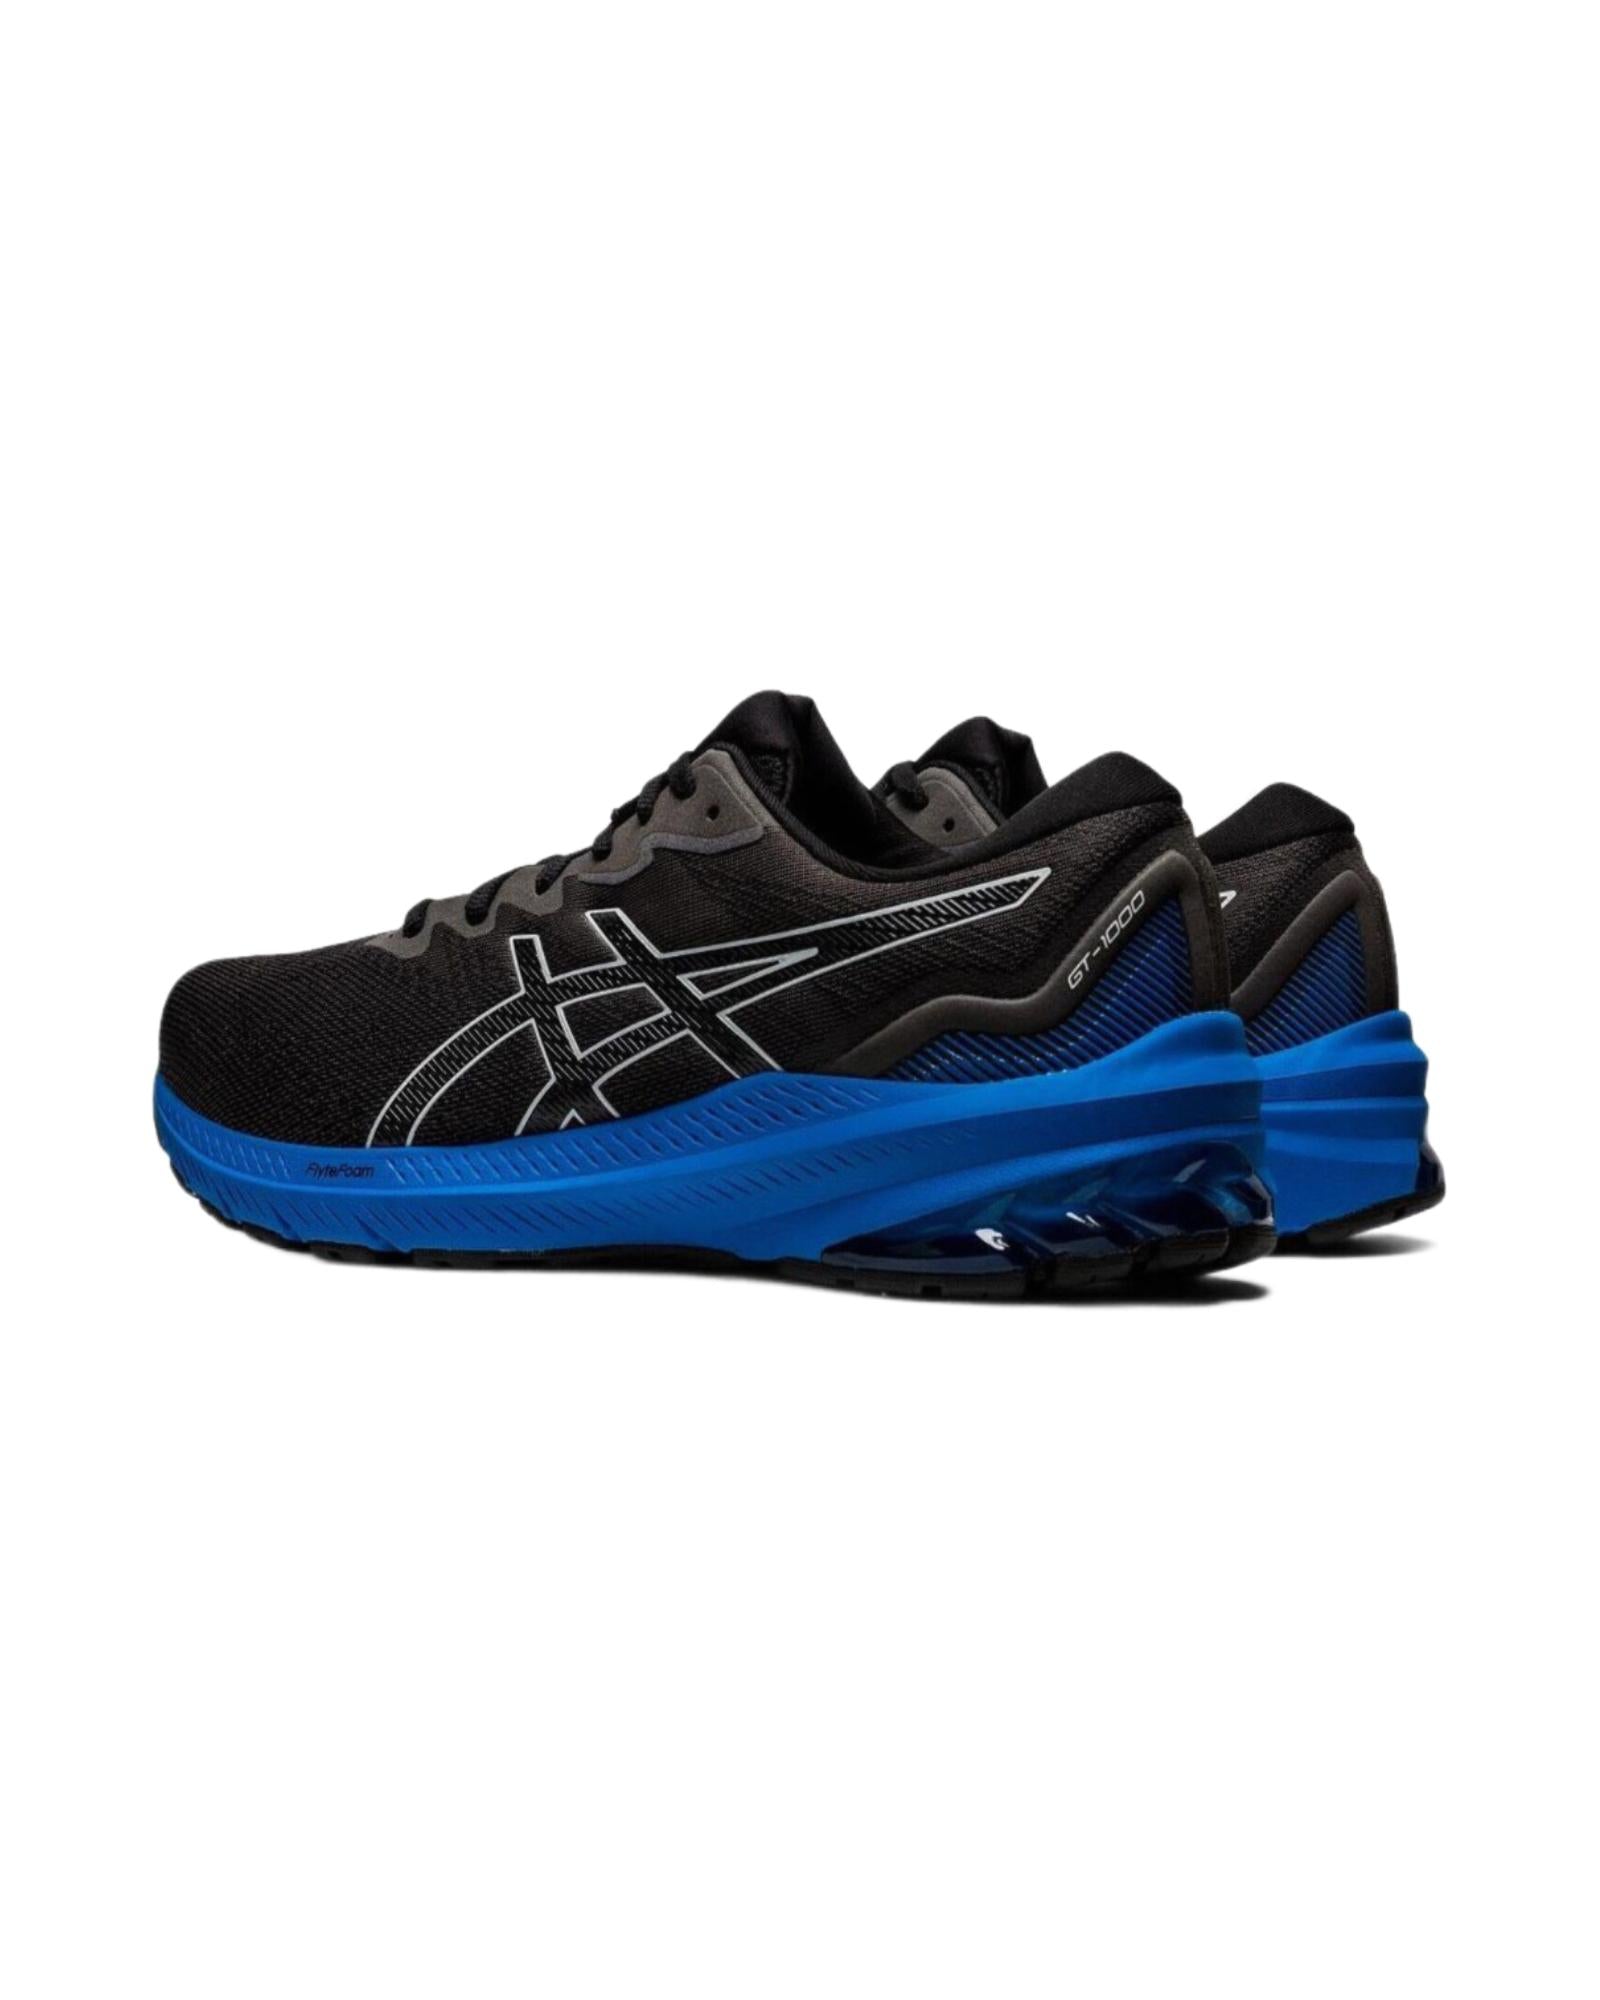 Soft and Smooth Running Shoe with Cushioning and Support - 14 US